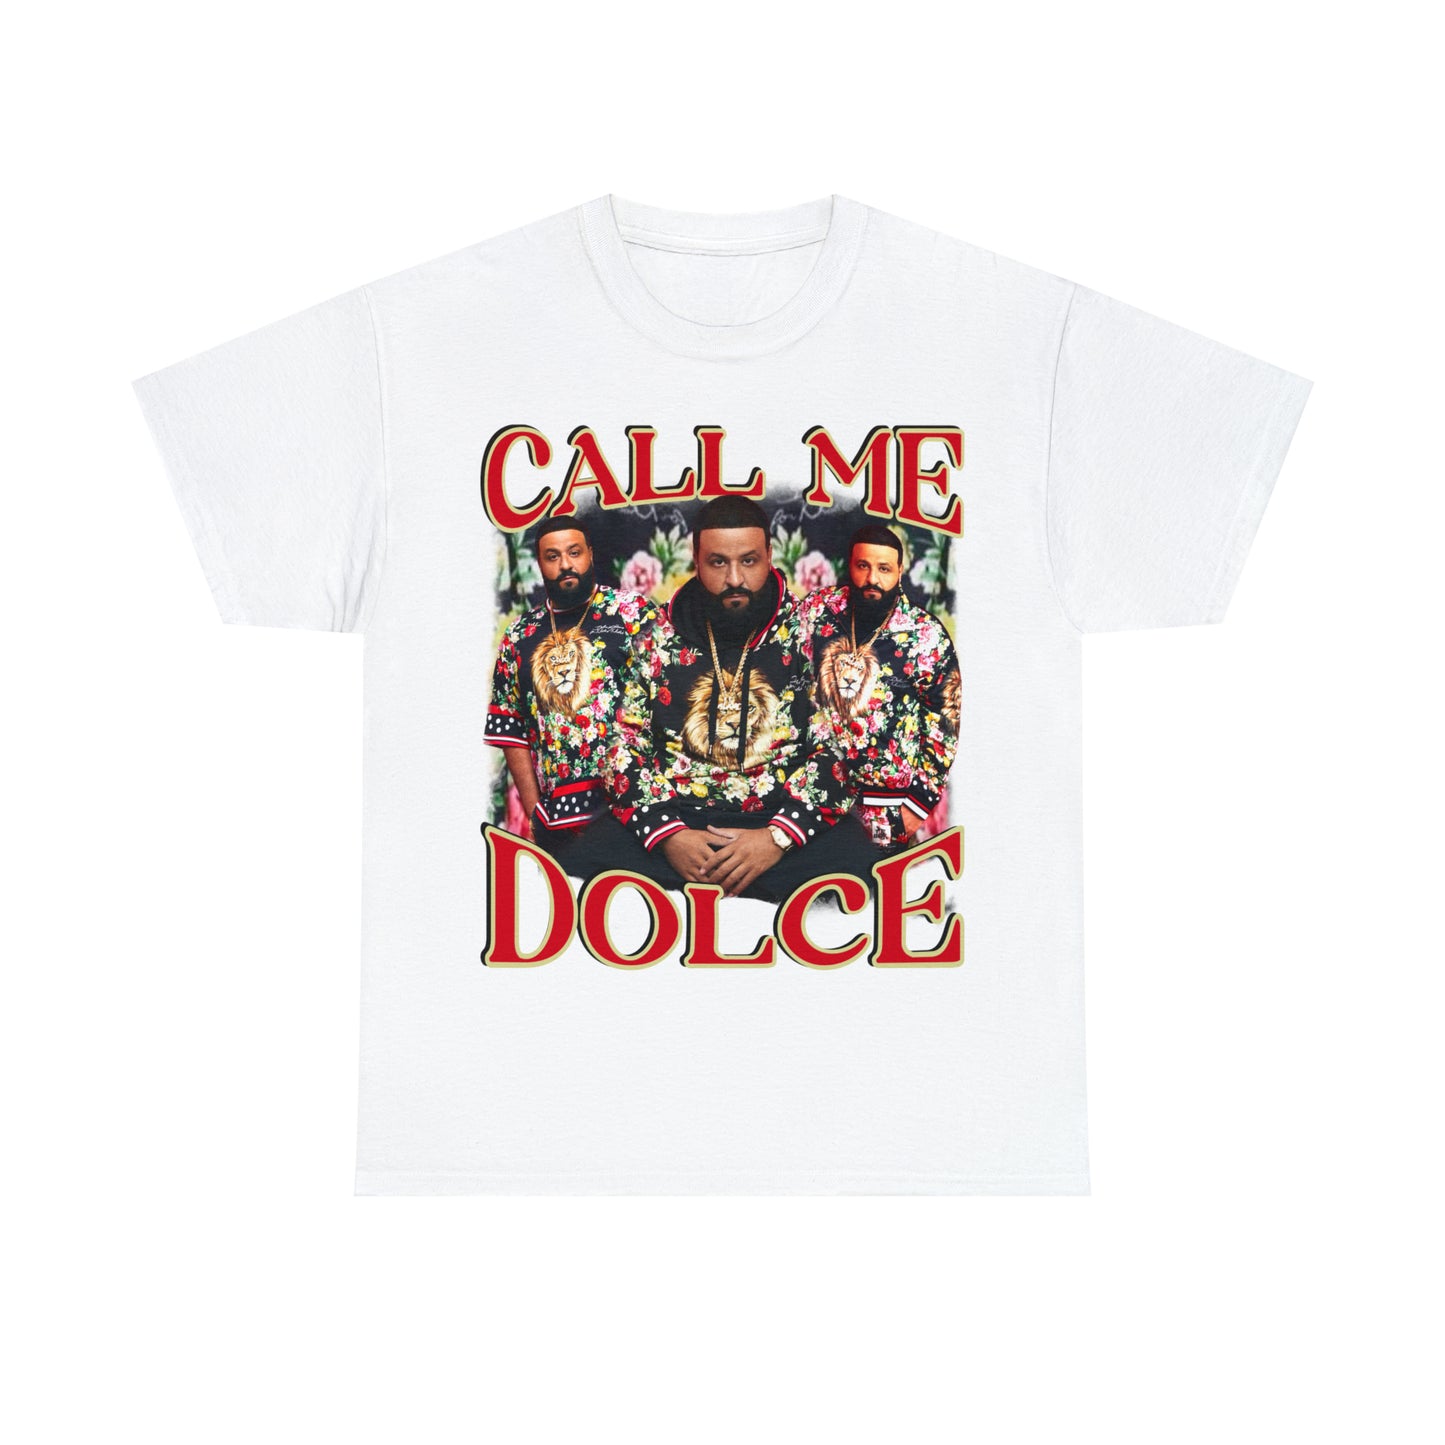 CALL ME DOLCE